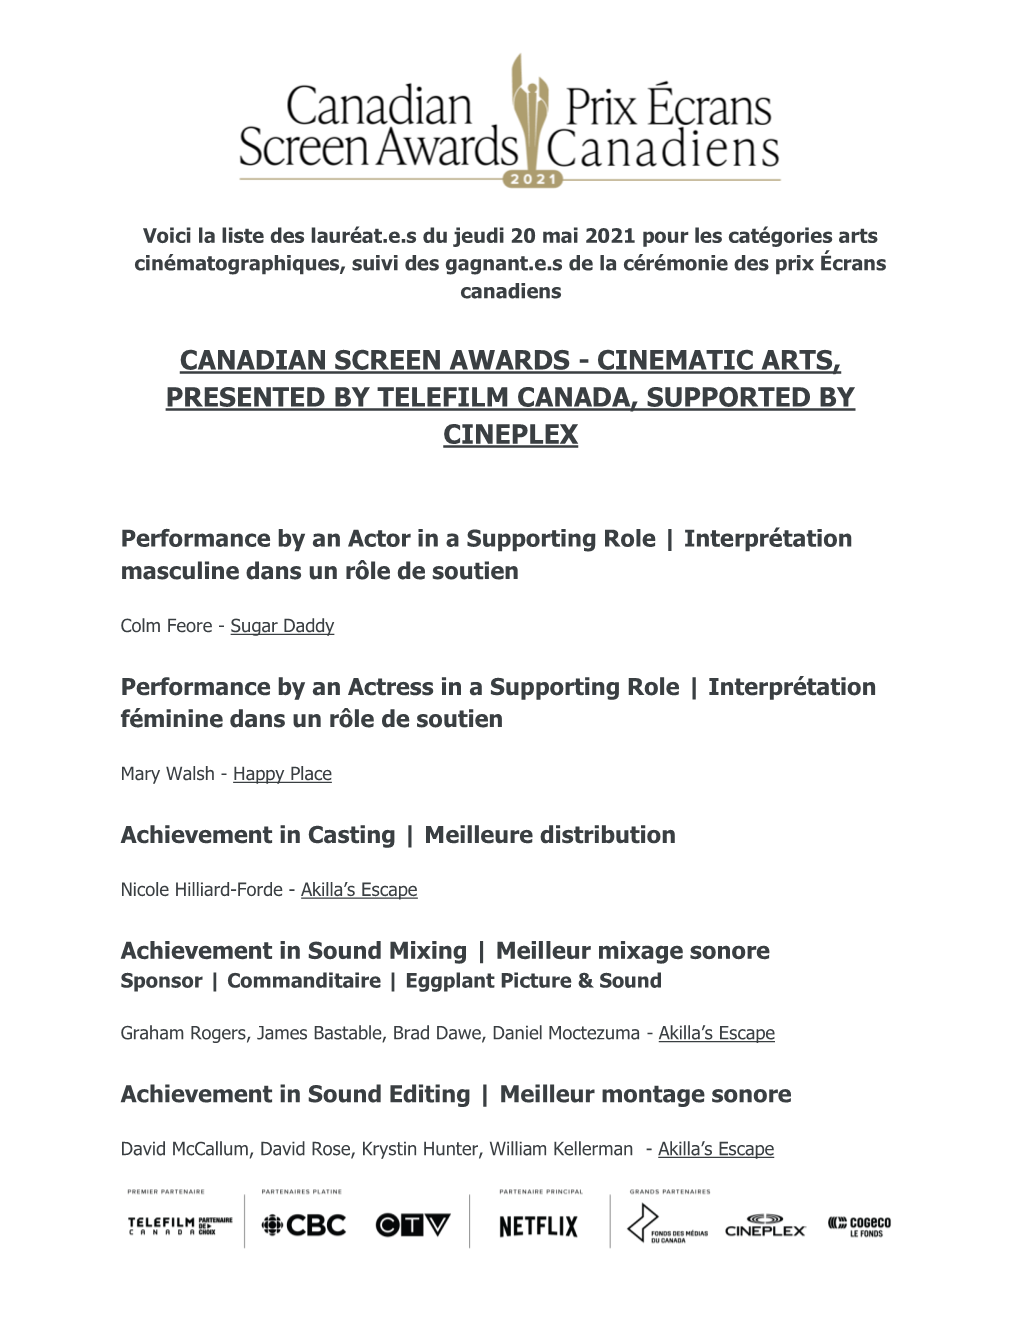 Canadian Screen Awards - Cinematic Arts, Presented by Telefilm Canada, Supported by Cineplex